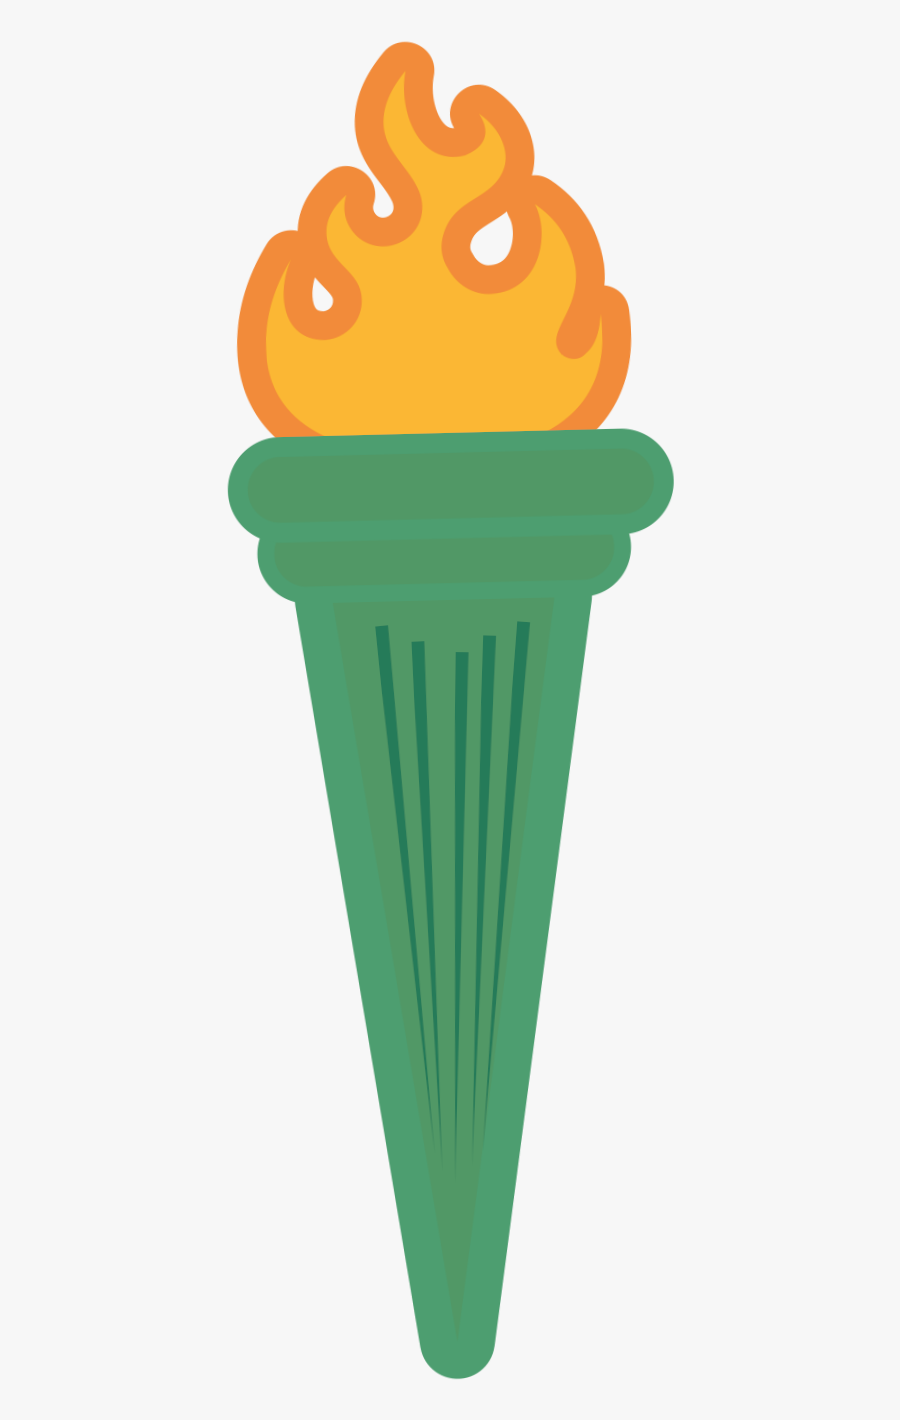 Statue Of Liberty Torch Clipart, Transparent Clipart